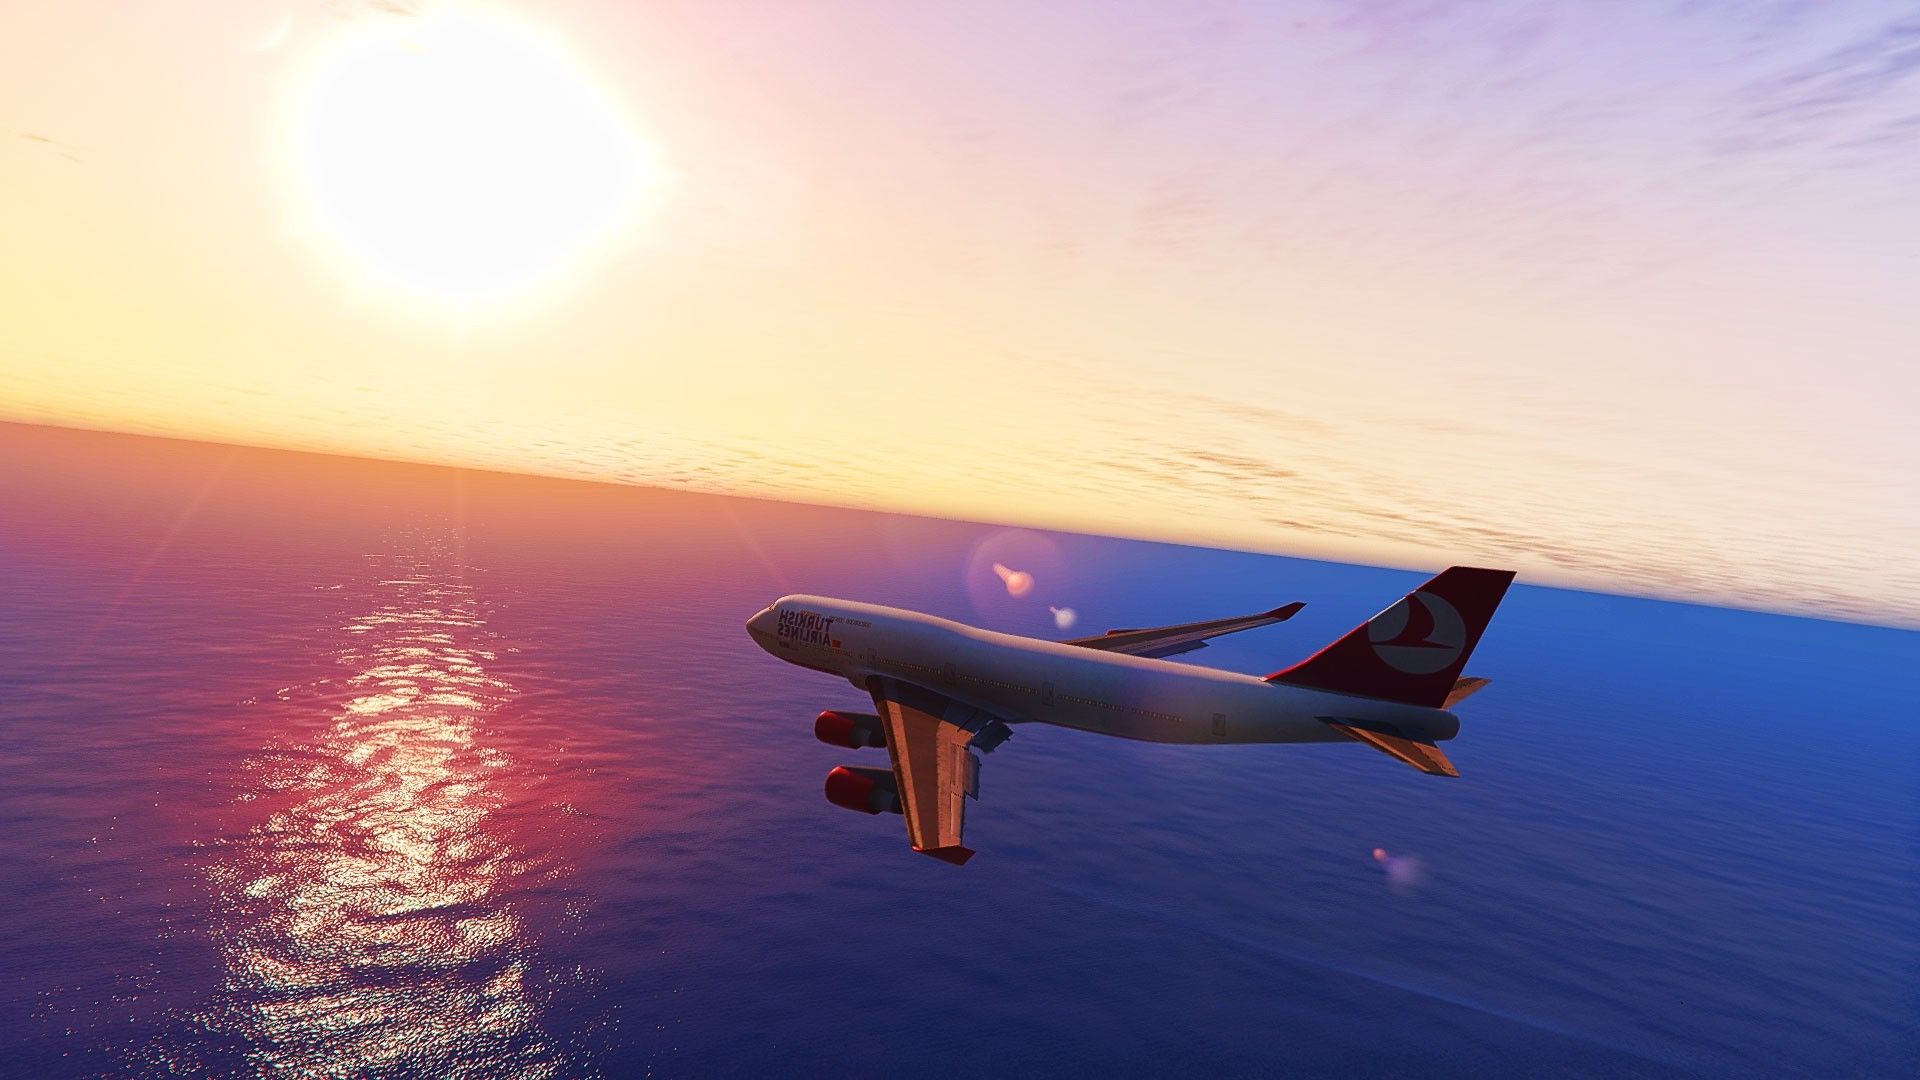 Grand Theft Auto V, PC Gaming, Turkish Airlines, Trevor Philips